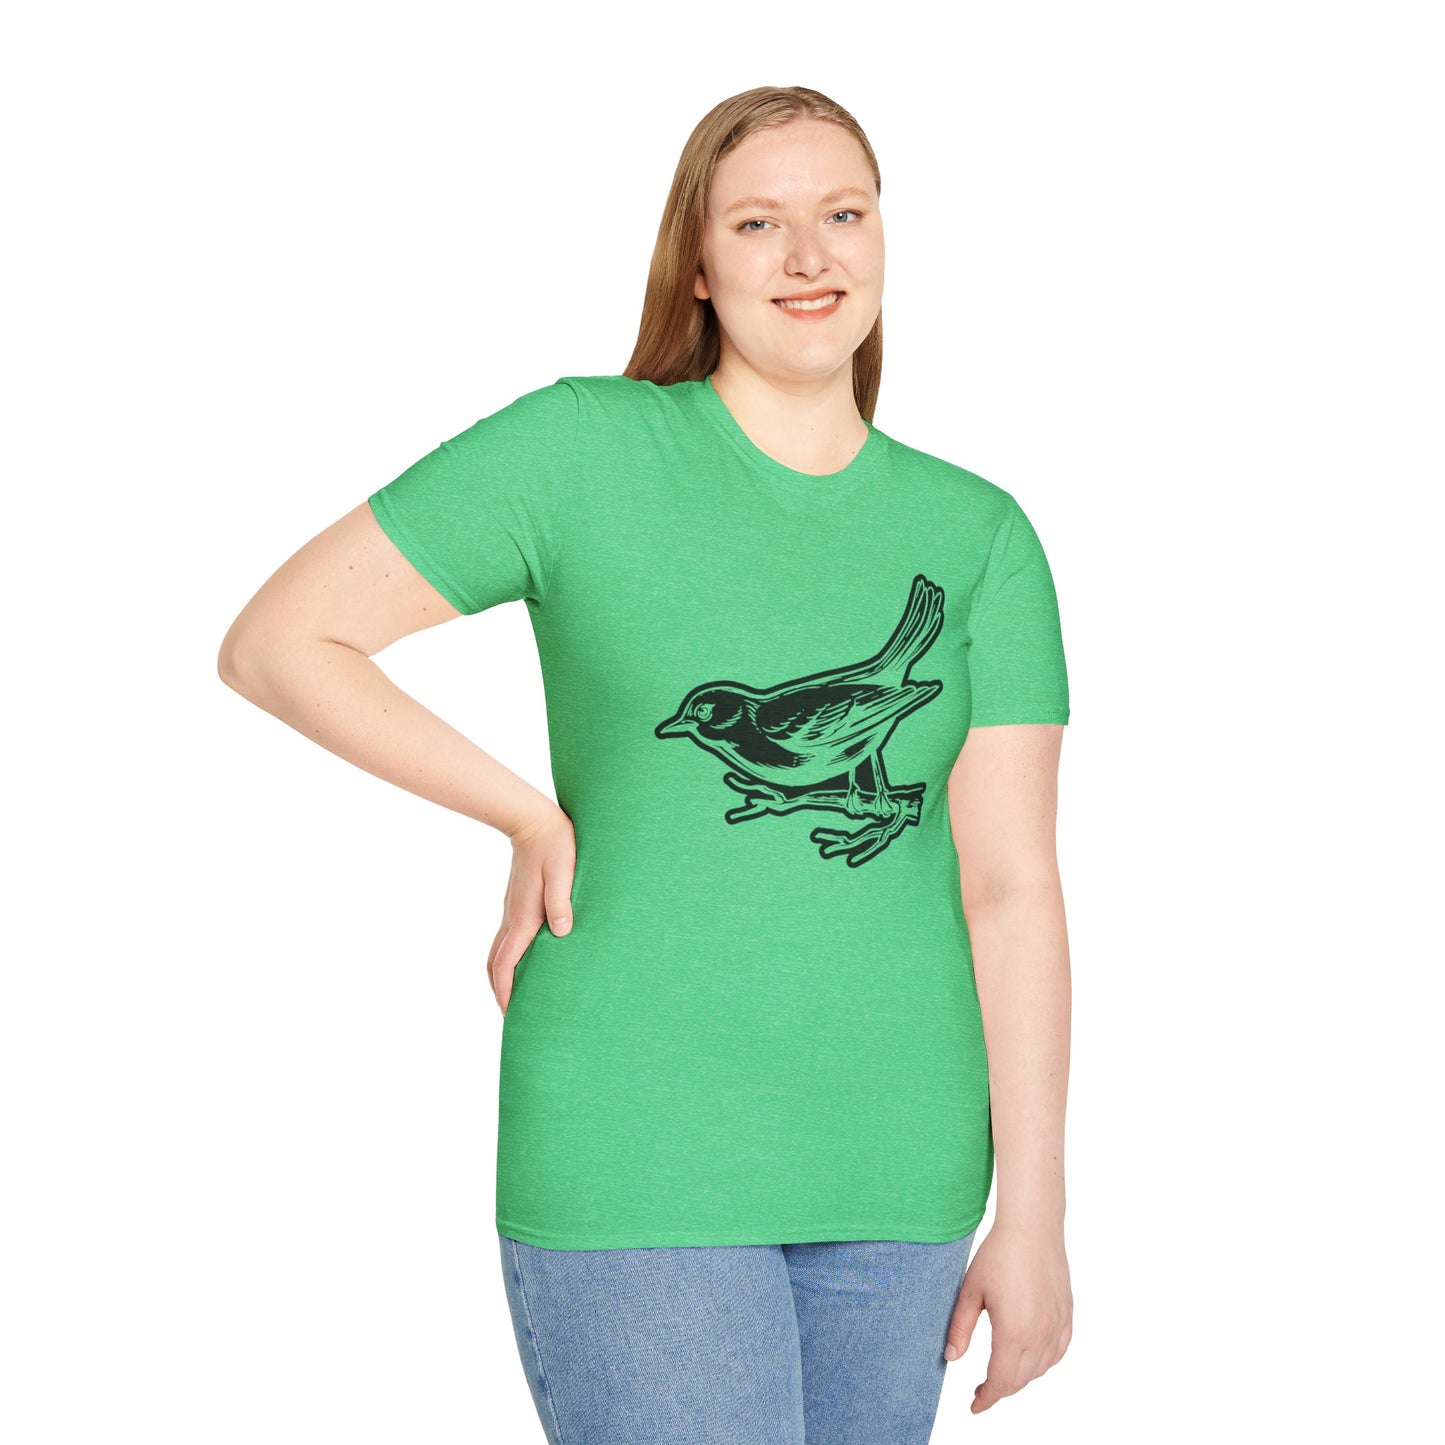 Birds Galore: Stylish and Vibrant T-Shirts for Nature Enthusiasts!